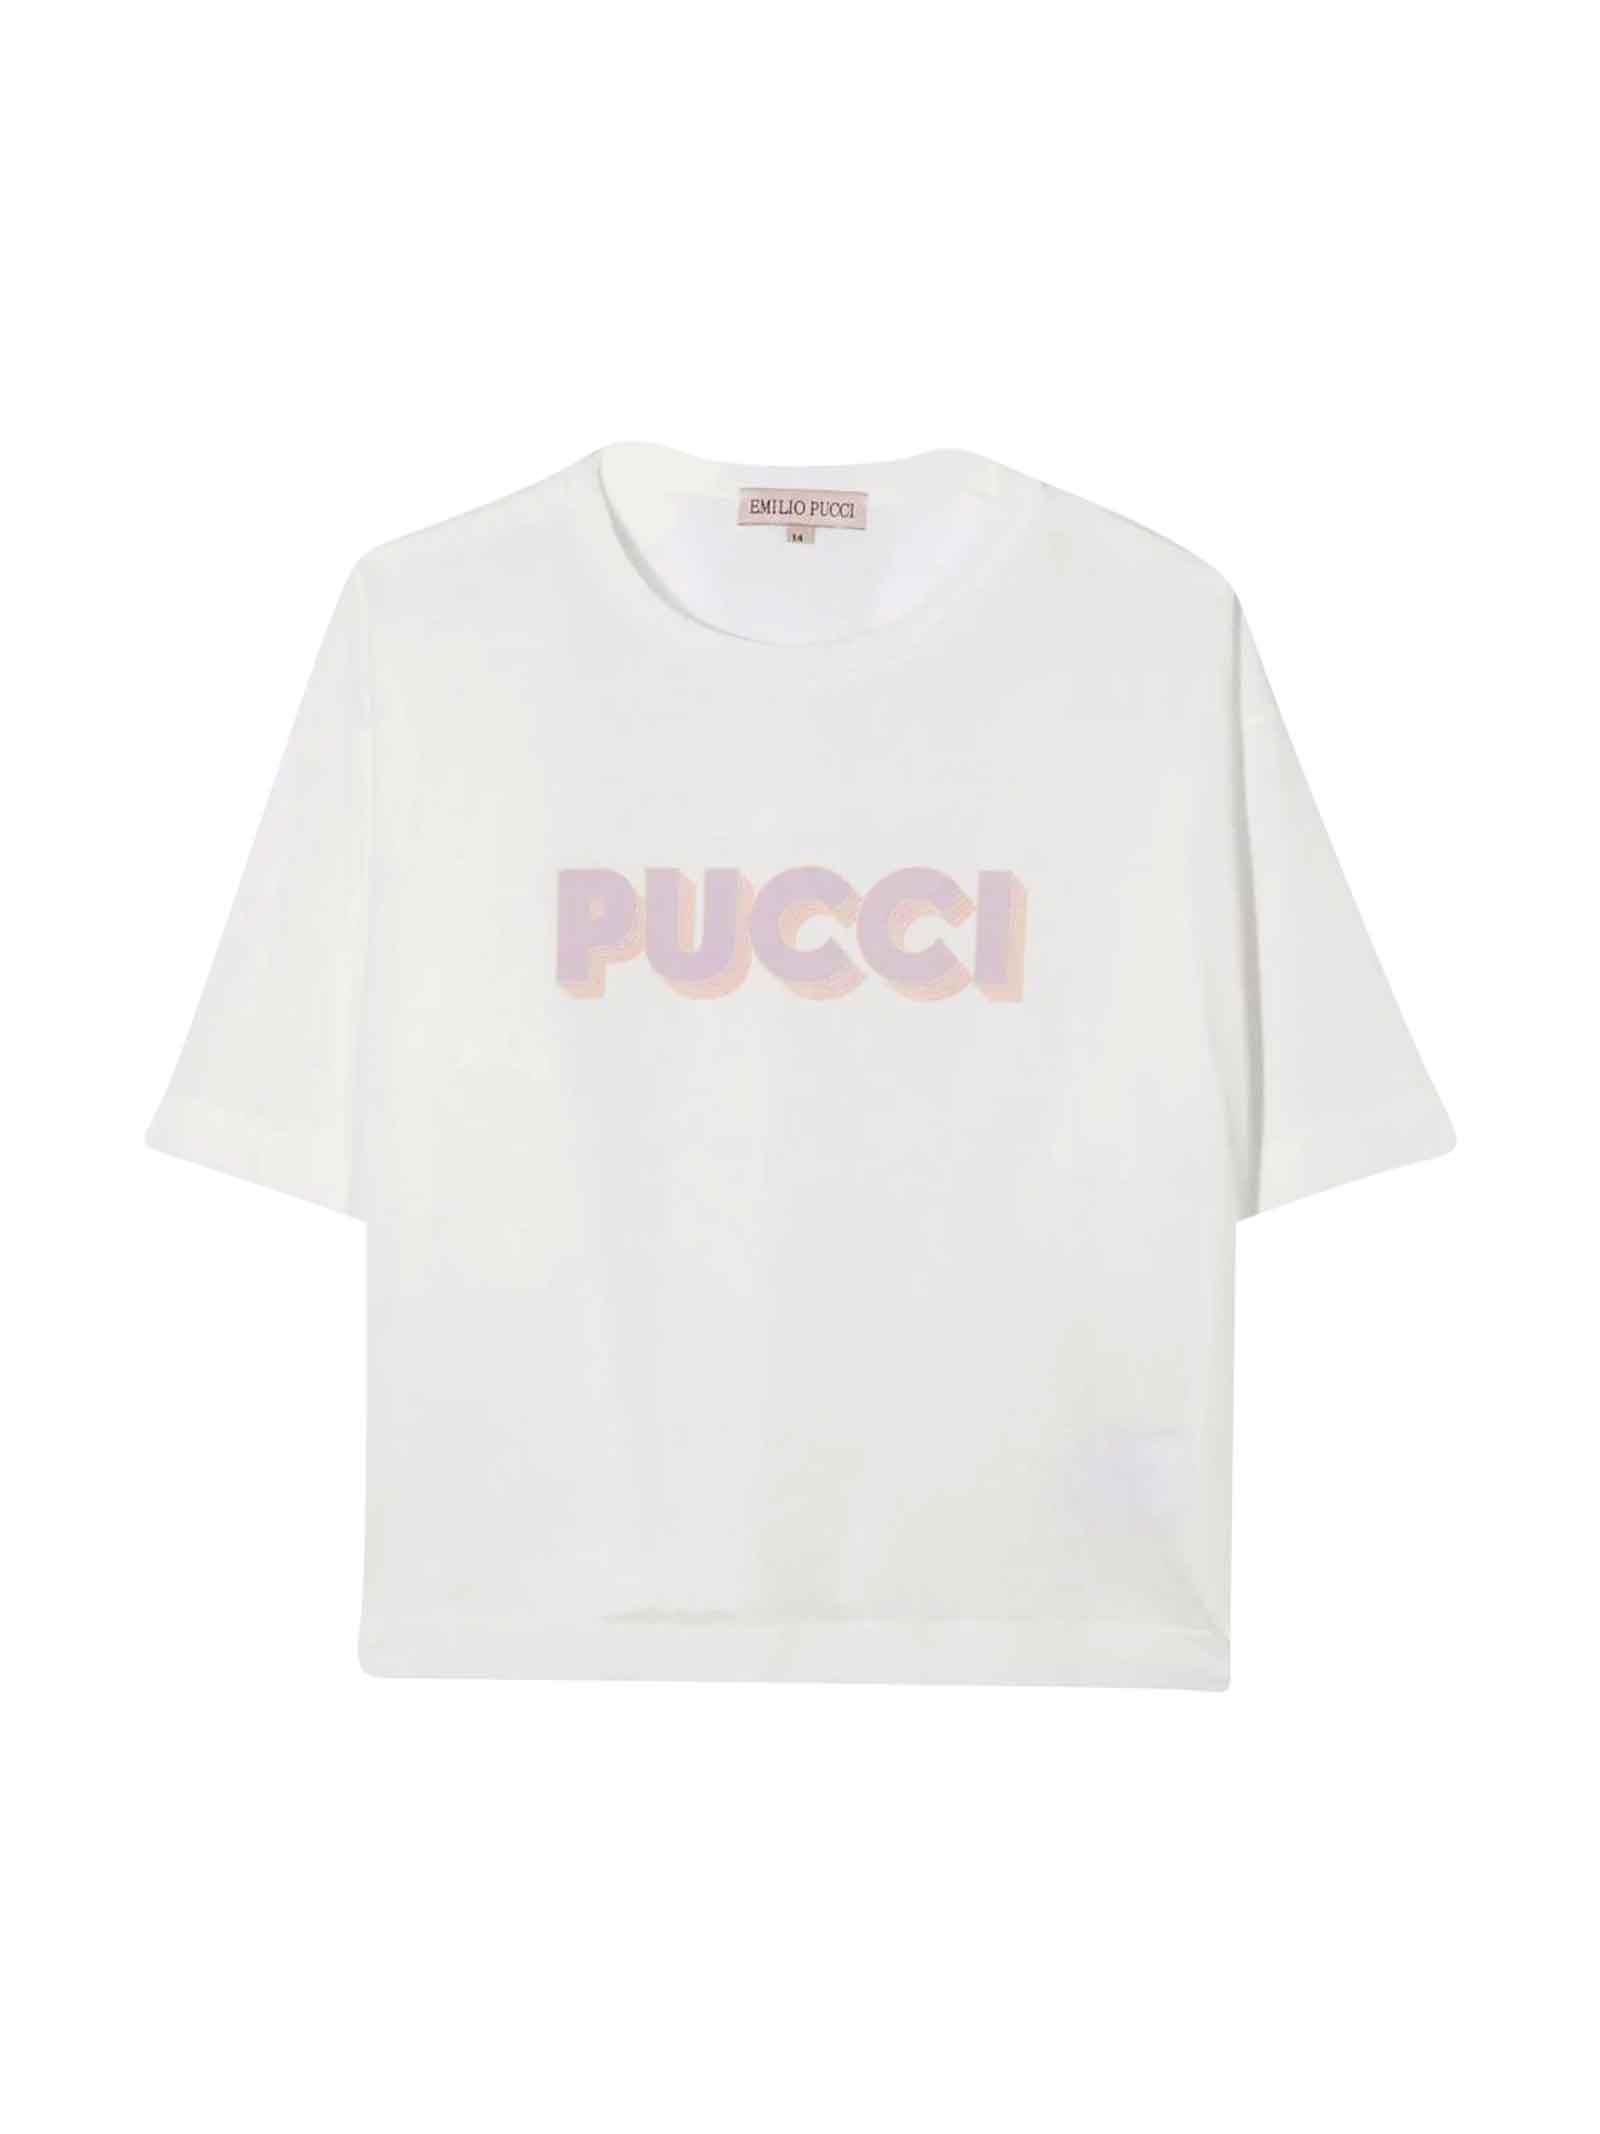 White T-shirt With Pink Print Emilio Pucci Kids